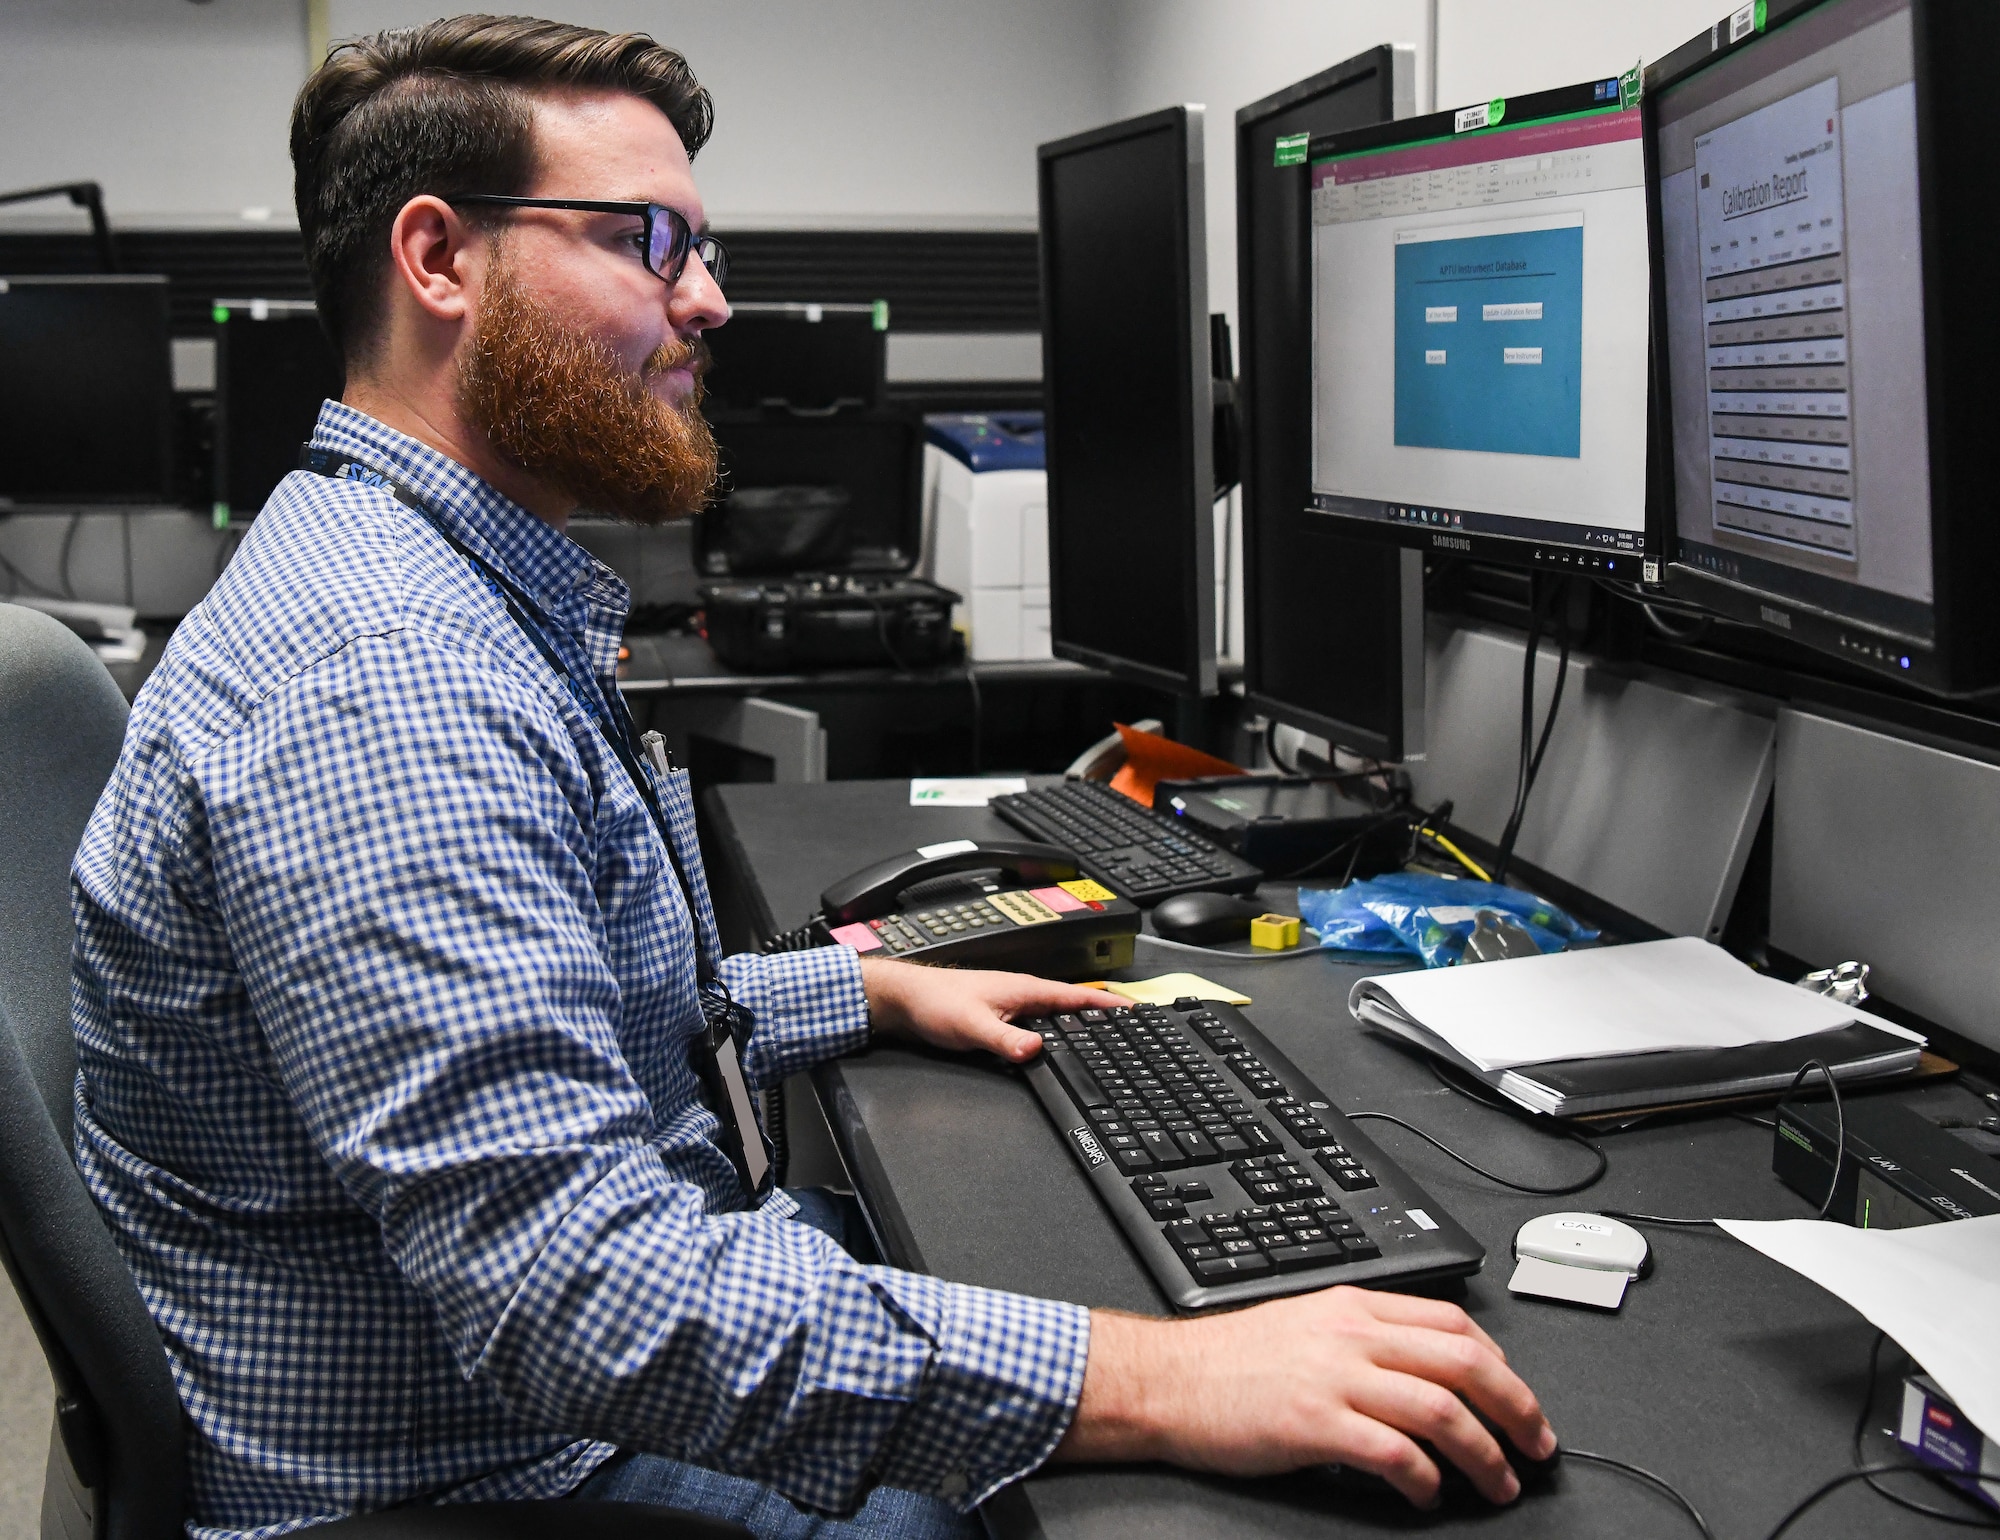 Gareth Penfold, an instrumentation, data and control engineer, views the digital database he created to track calibration requirements for test, measurement and diagnostic equipment used in the AEDC Aerodynamic and Propulsion Test Unit at Arnold Air Force Base. The calibration records were previously kept in binders, then moved to a spreadsheet and now are tracked via the database created by Penfold. (U.S. Air Force photo by Jill Pickett) (This image has been altered by obscuring badges for security purposes.)